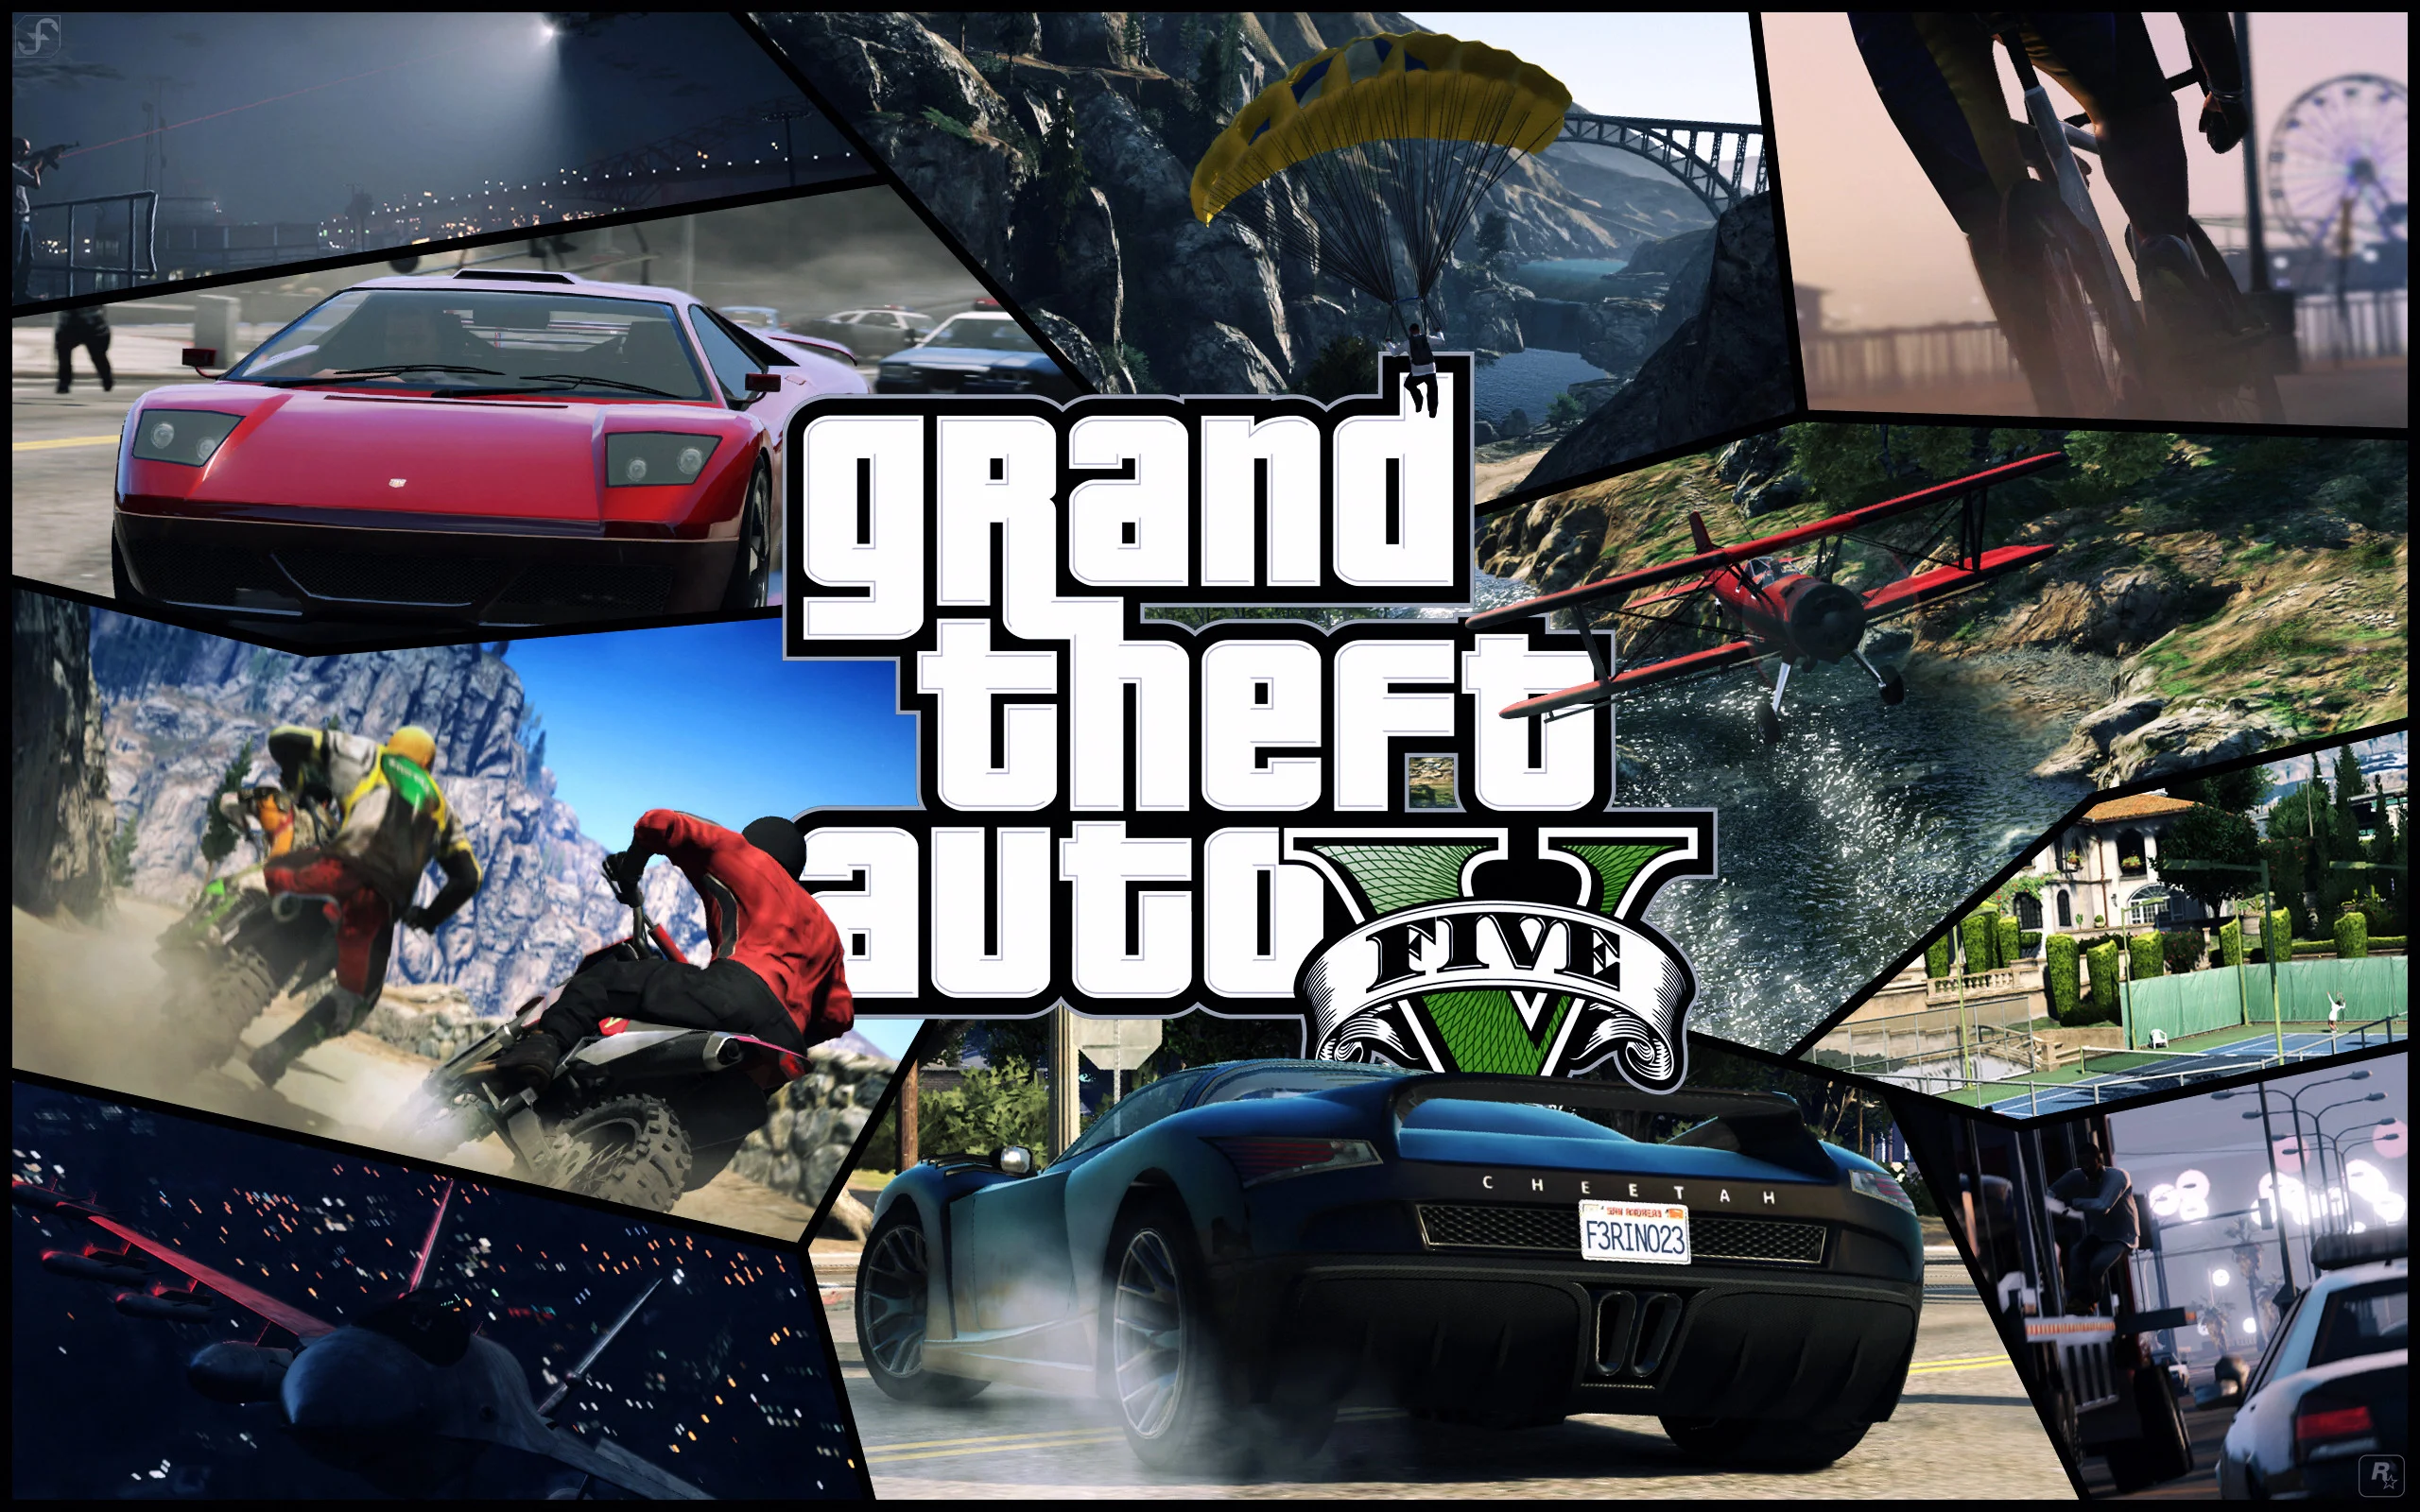 Top Collection of GTA 5 HD Wallpapers, Gta 5 Wallpaper Hd, Pack V.